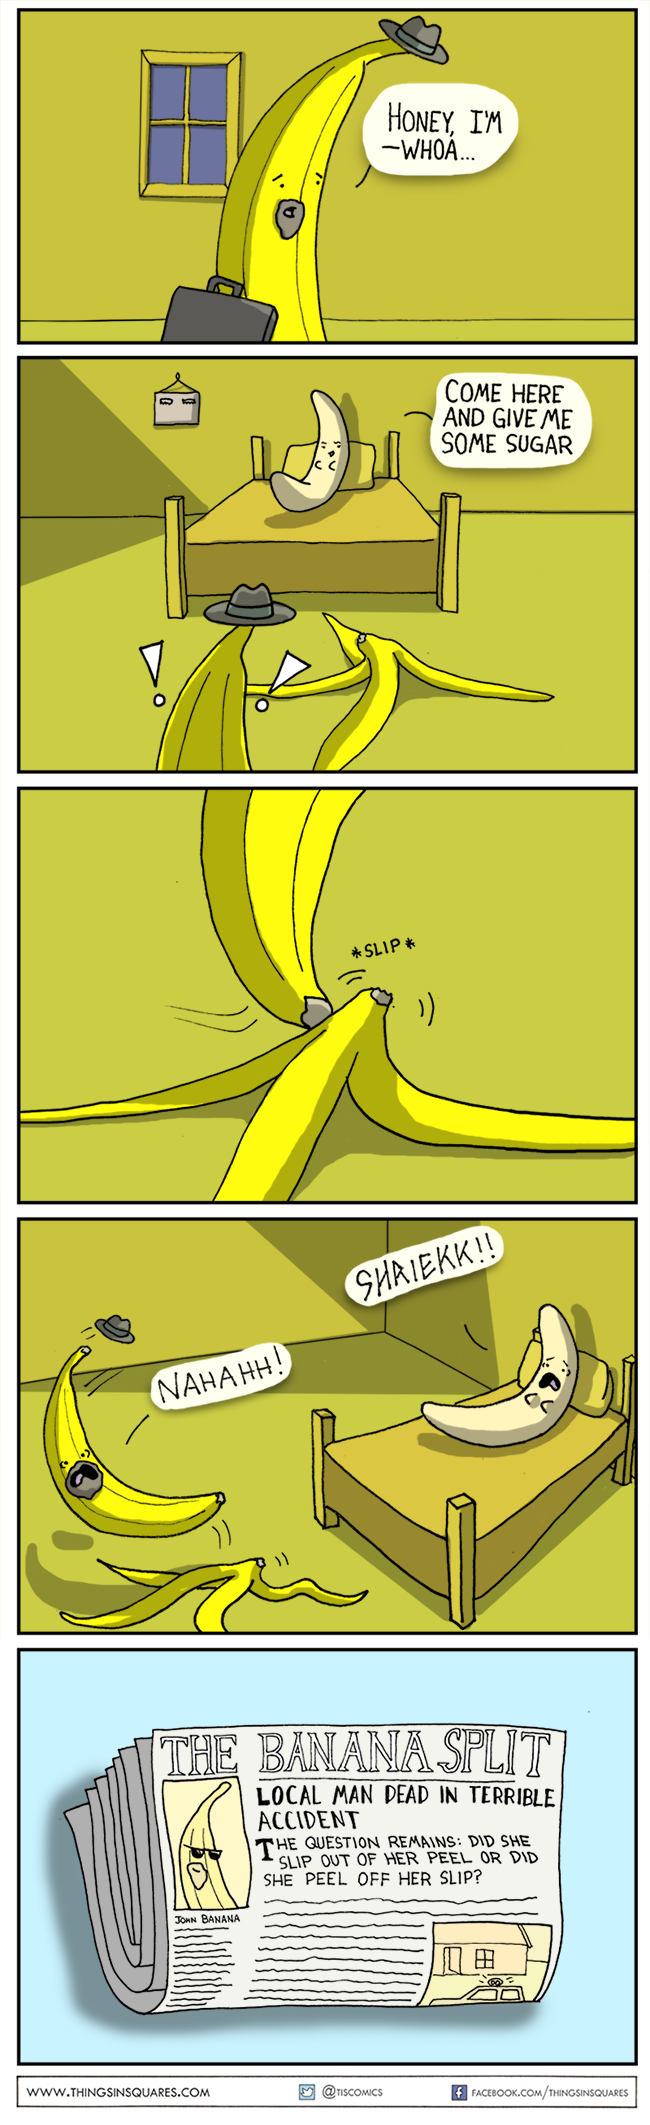 A comic about a banana. He comes in to his wife, totally fucking nude and hot. But he slips on her peel. Police are questioning whether she slipped off her peel or peeled off her slip.